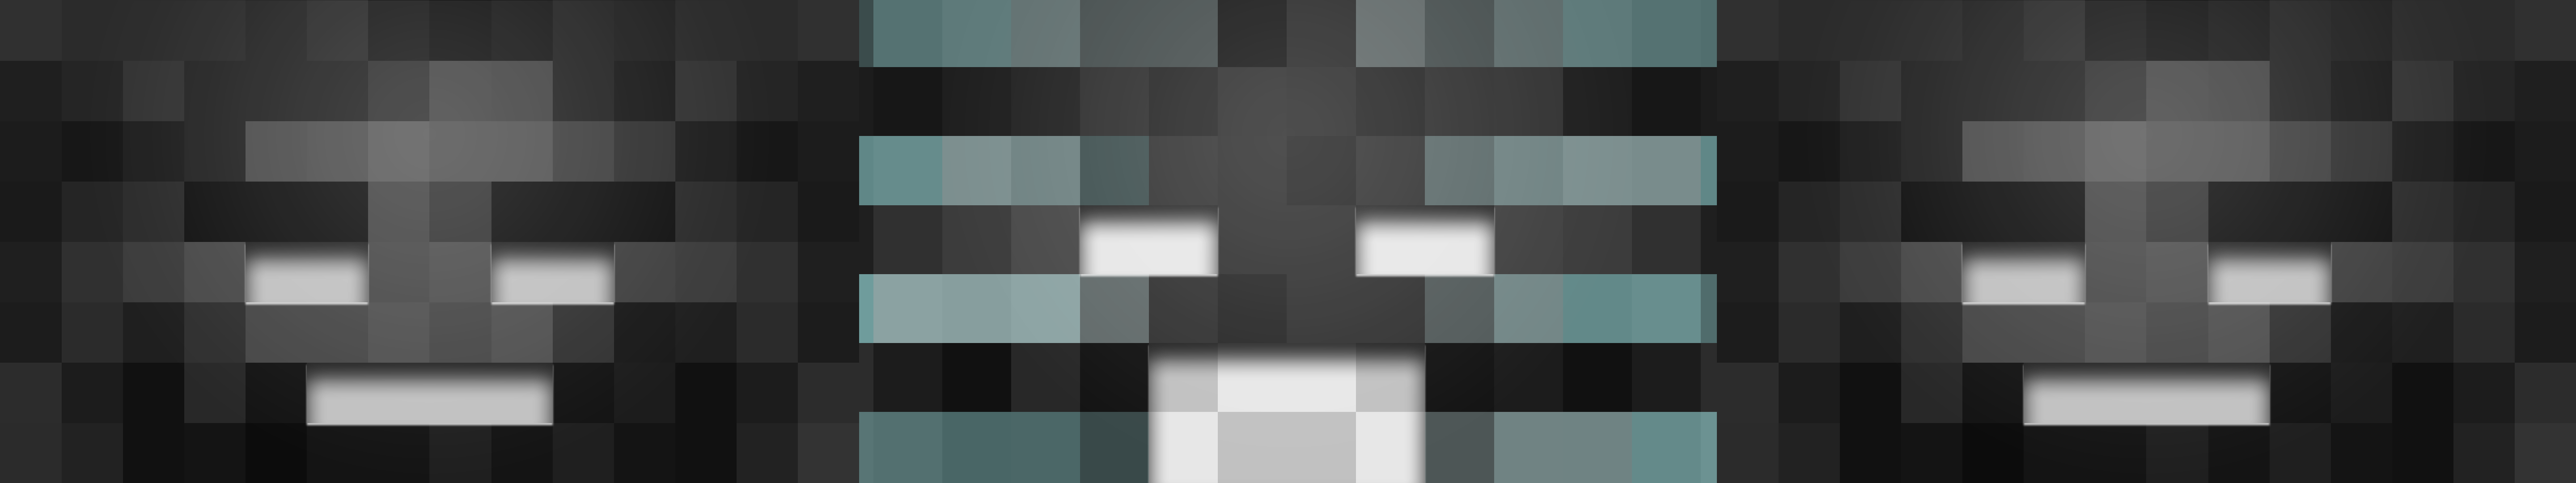 DeviantArt: More Like Minecraft Wither Triple Monitor Wallpaper by ...